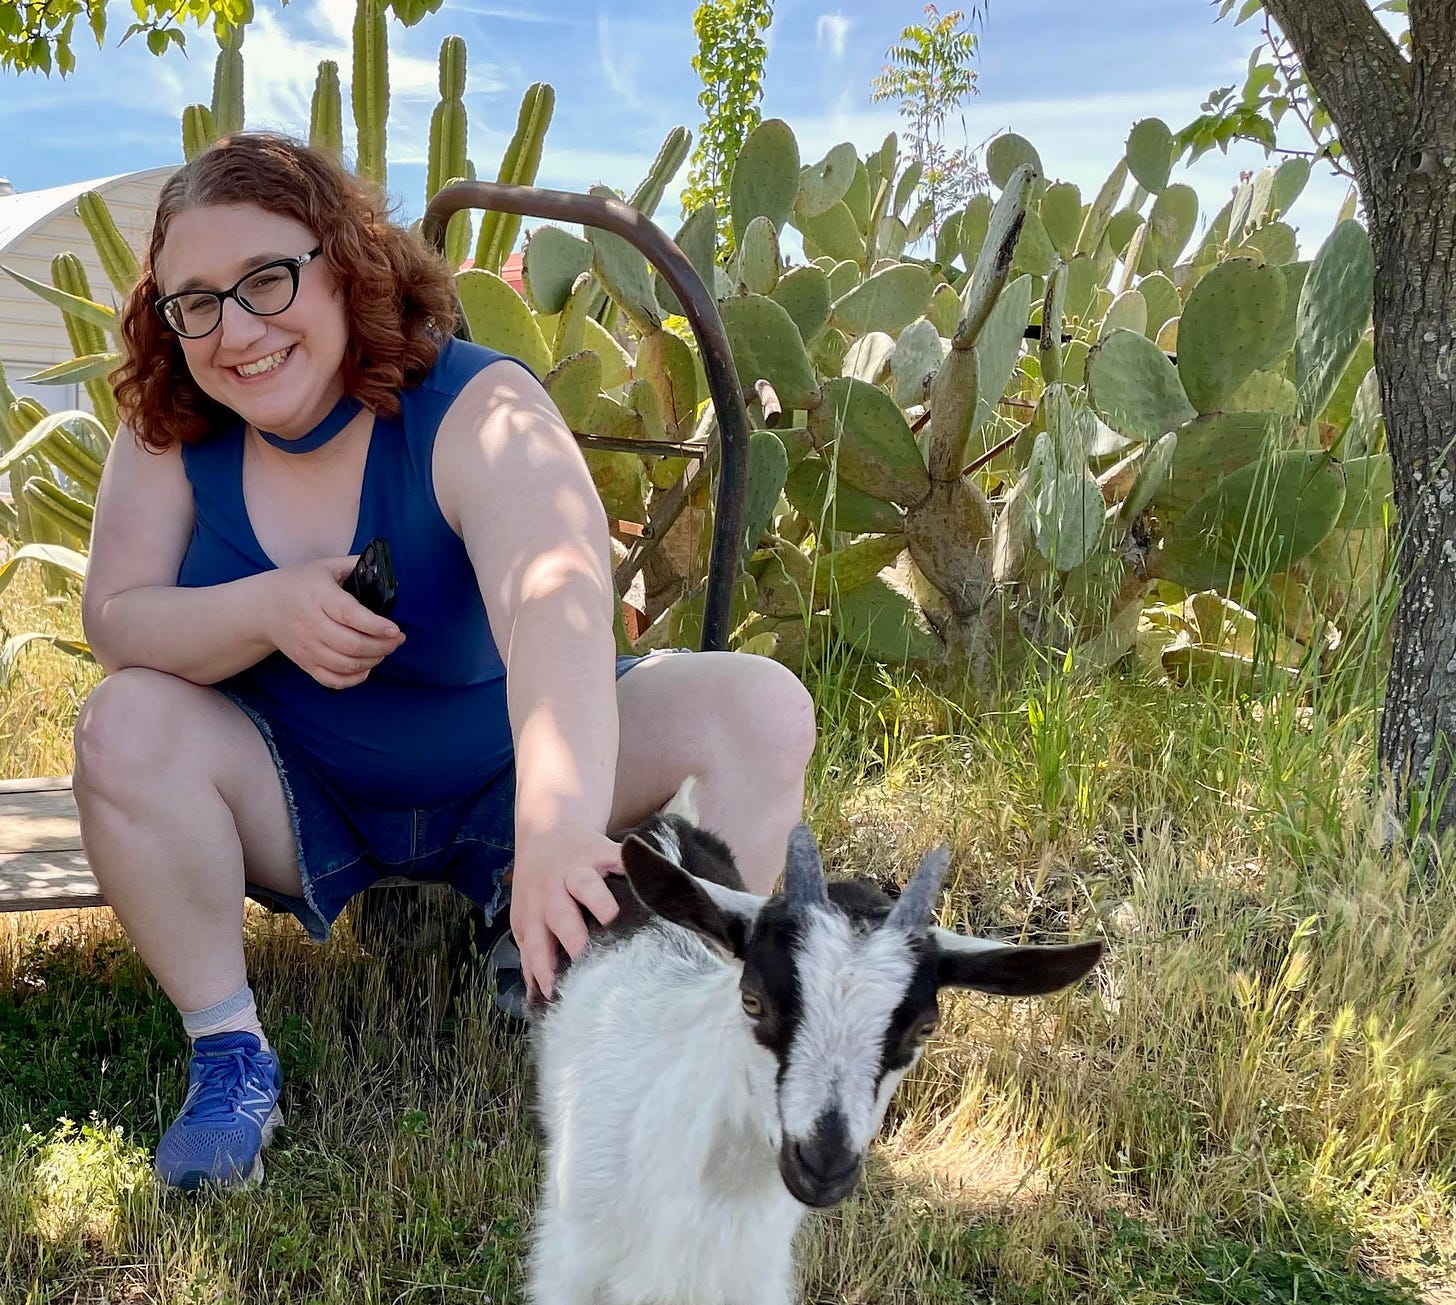 A picture of me smiling in blue jean shorts, blue sneakers, and a blue tank top as I sit on top of a pushcart of some kind in front of a cactus and pet a black and white baby goat with my left hand while holding my cell phone against my chest in my right hand. 